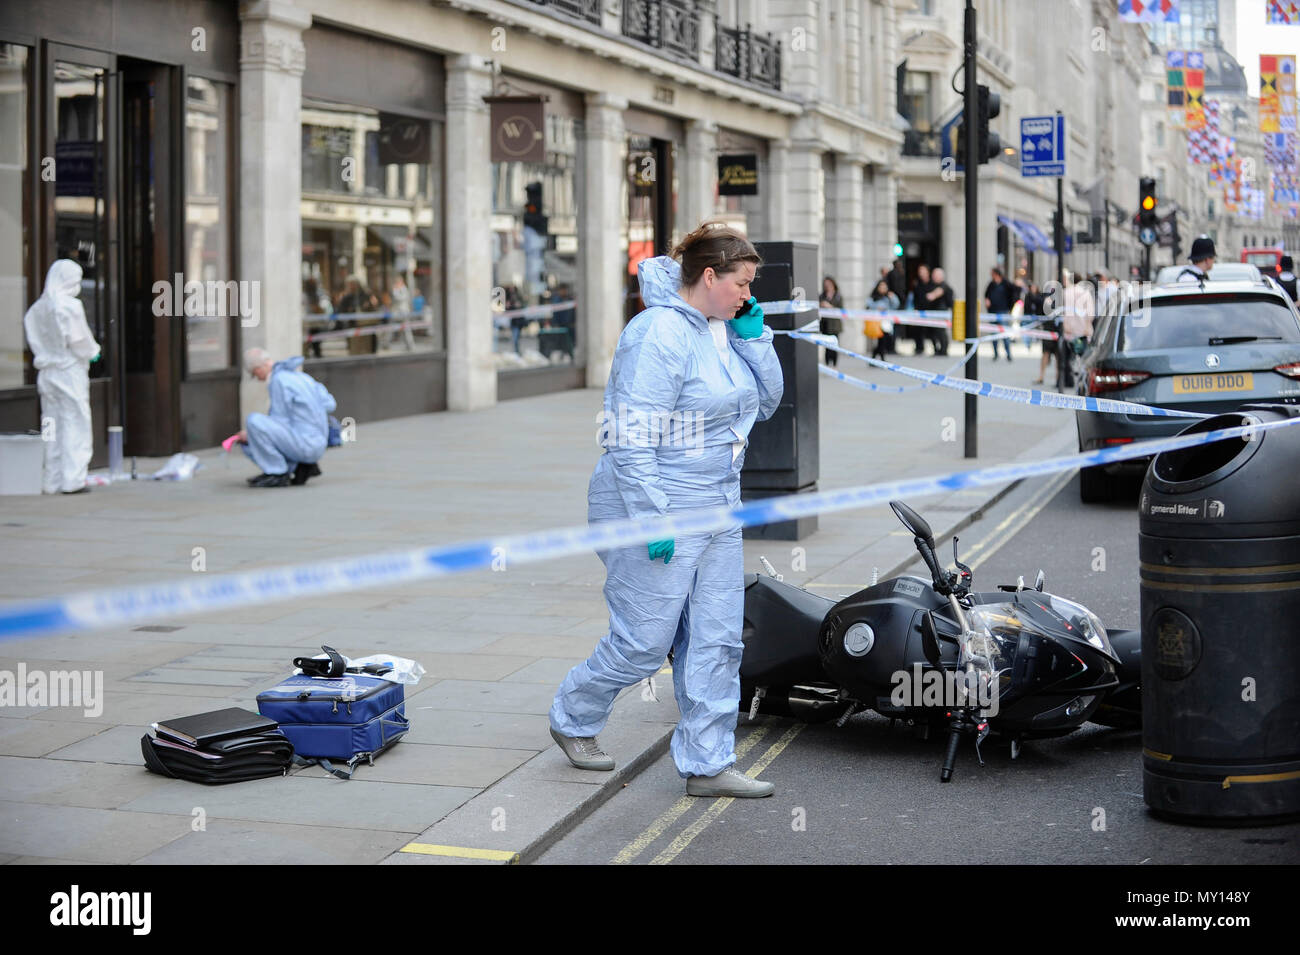 London, UK.  5 June 2018.  Members of a forensics team examines the scene outside the Watches of Switzerland on Regent Street.  Two motorcycles were involved in a smash and grab incident at the premises.  Investigations are ongoing. Credit: Stephen Chung / Alamy Live News Stock Photo